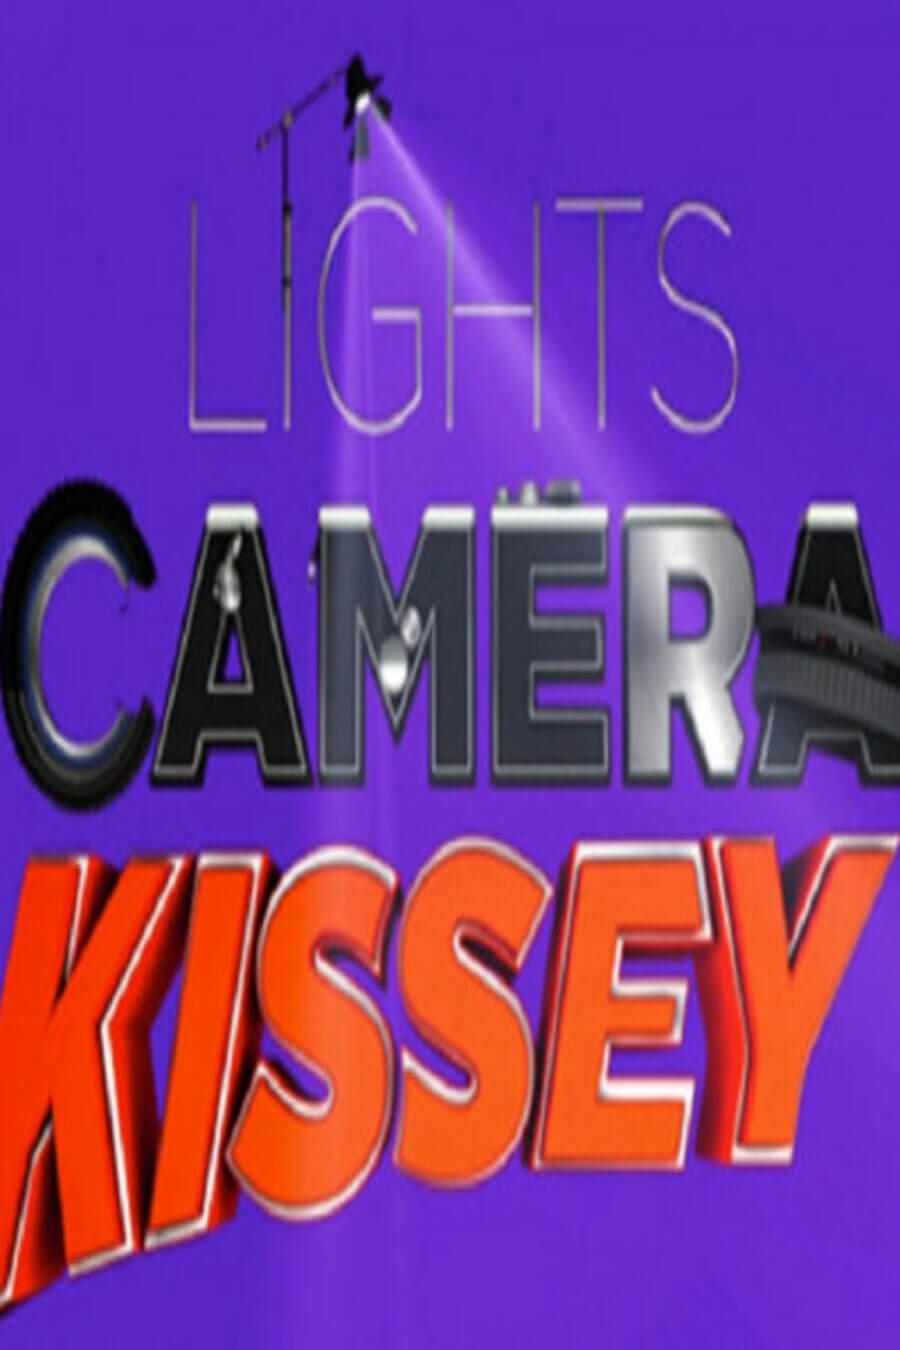 TV ratings for Lights Camera Kissey in the United States. SonyLIV TV series